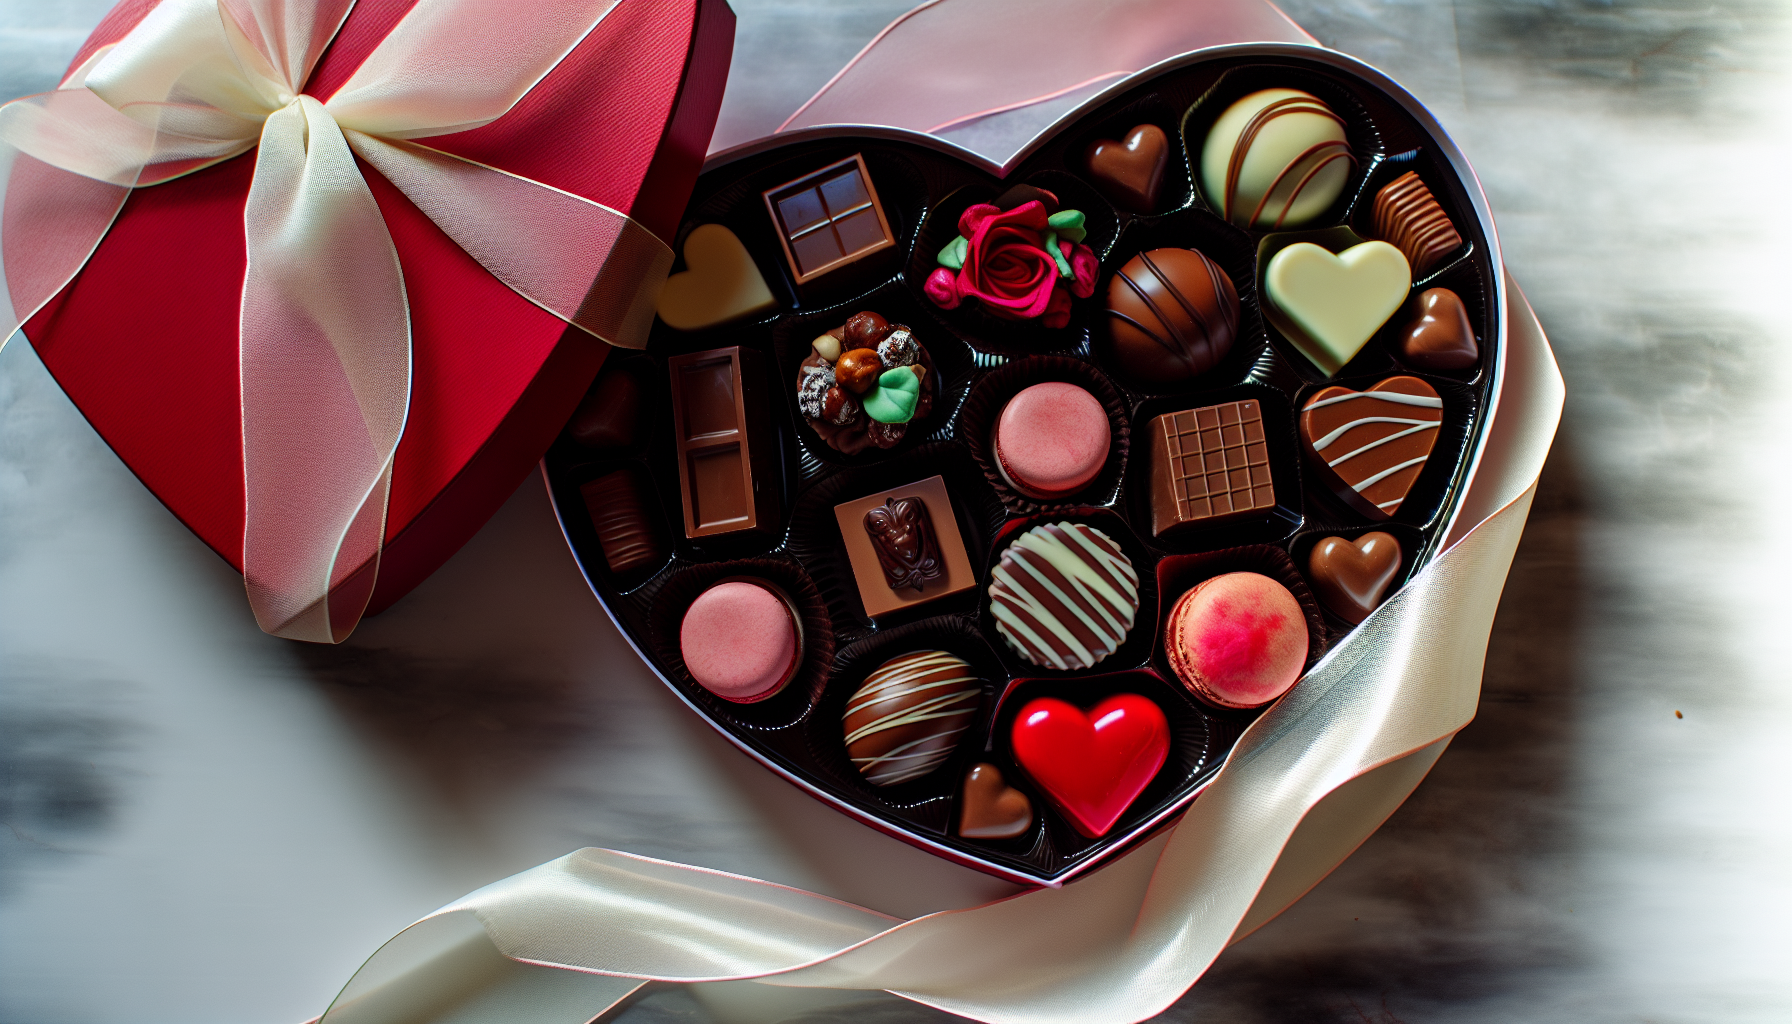 Delicious assortment of chocolates and sweets